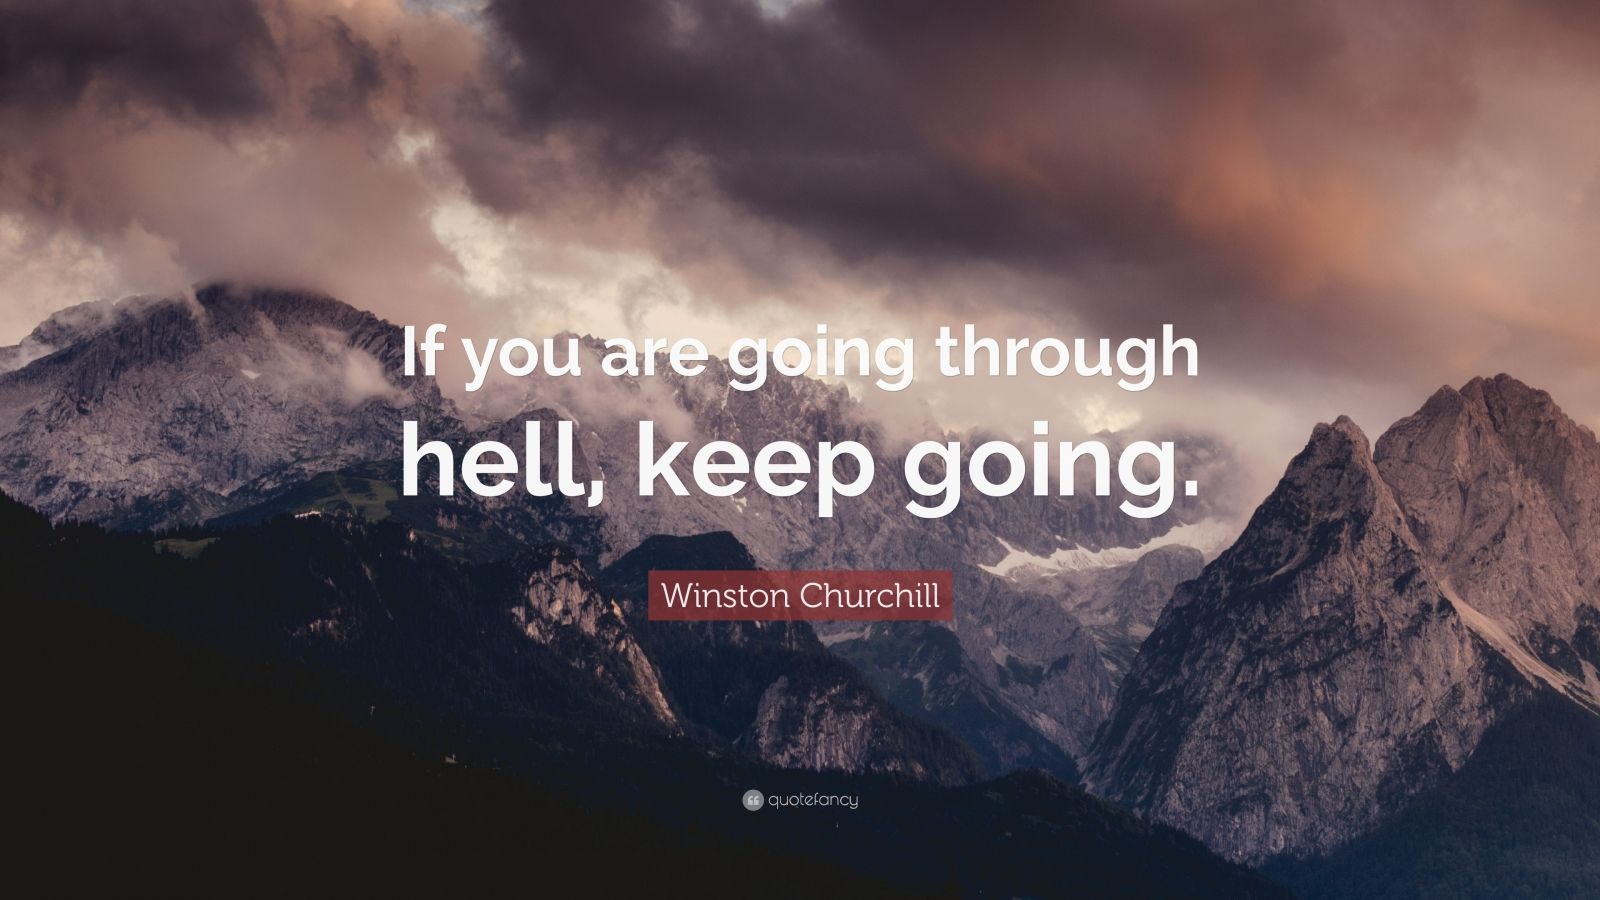 Winston Churchill Quote: “If you are going through hell, keep going